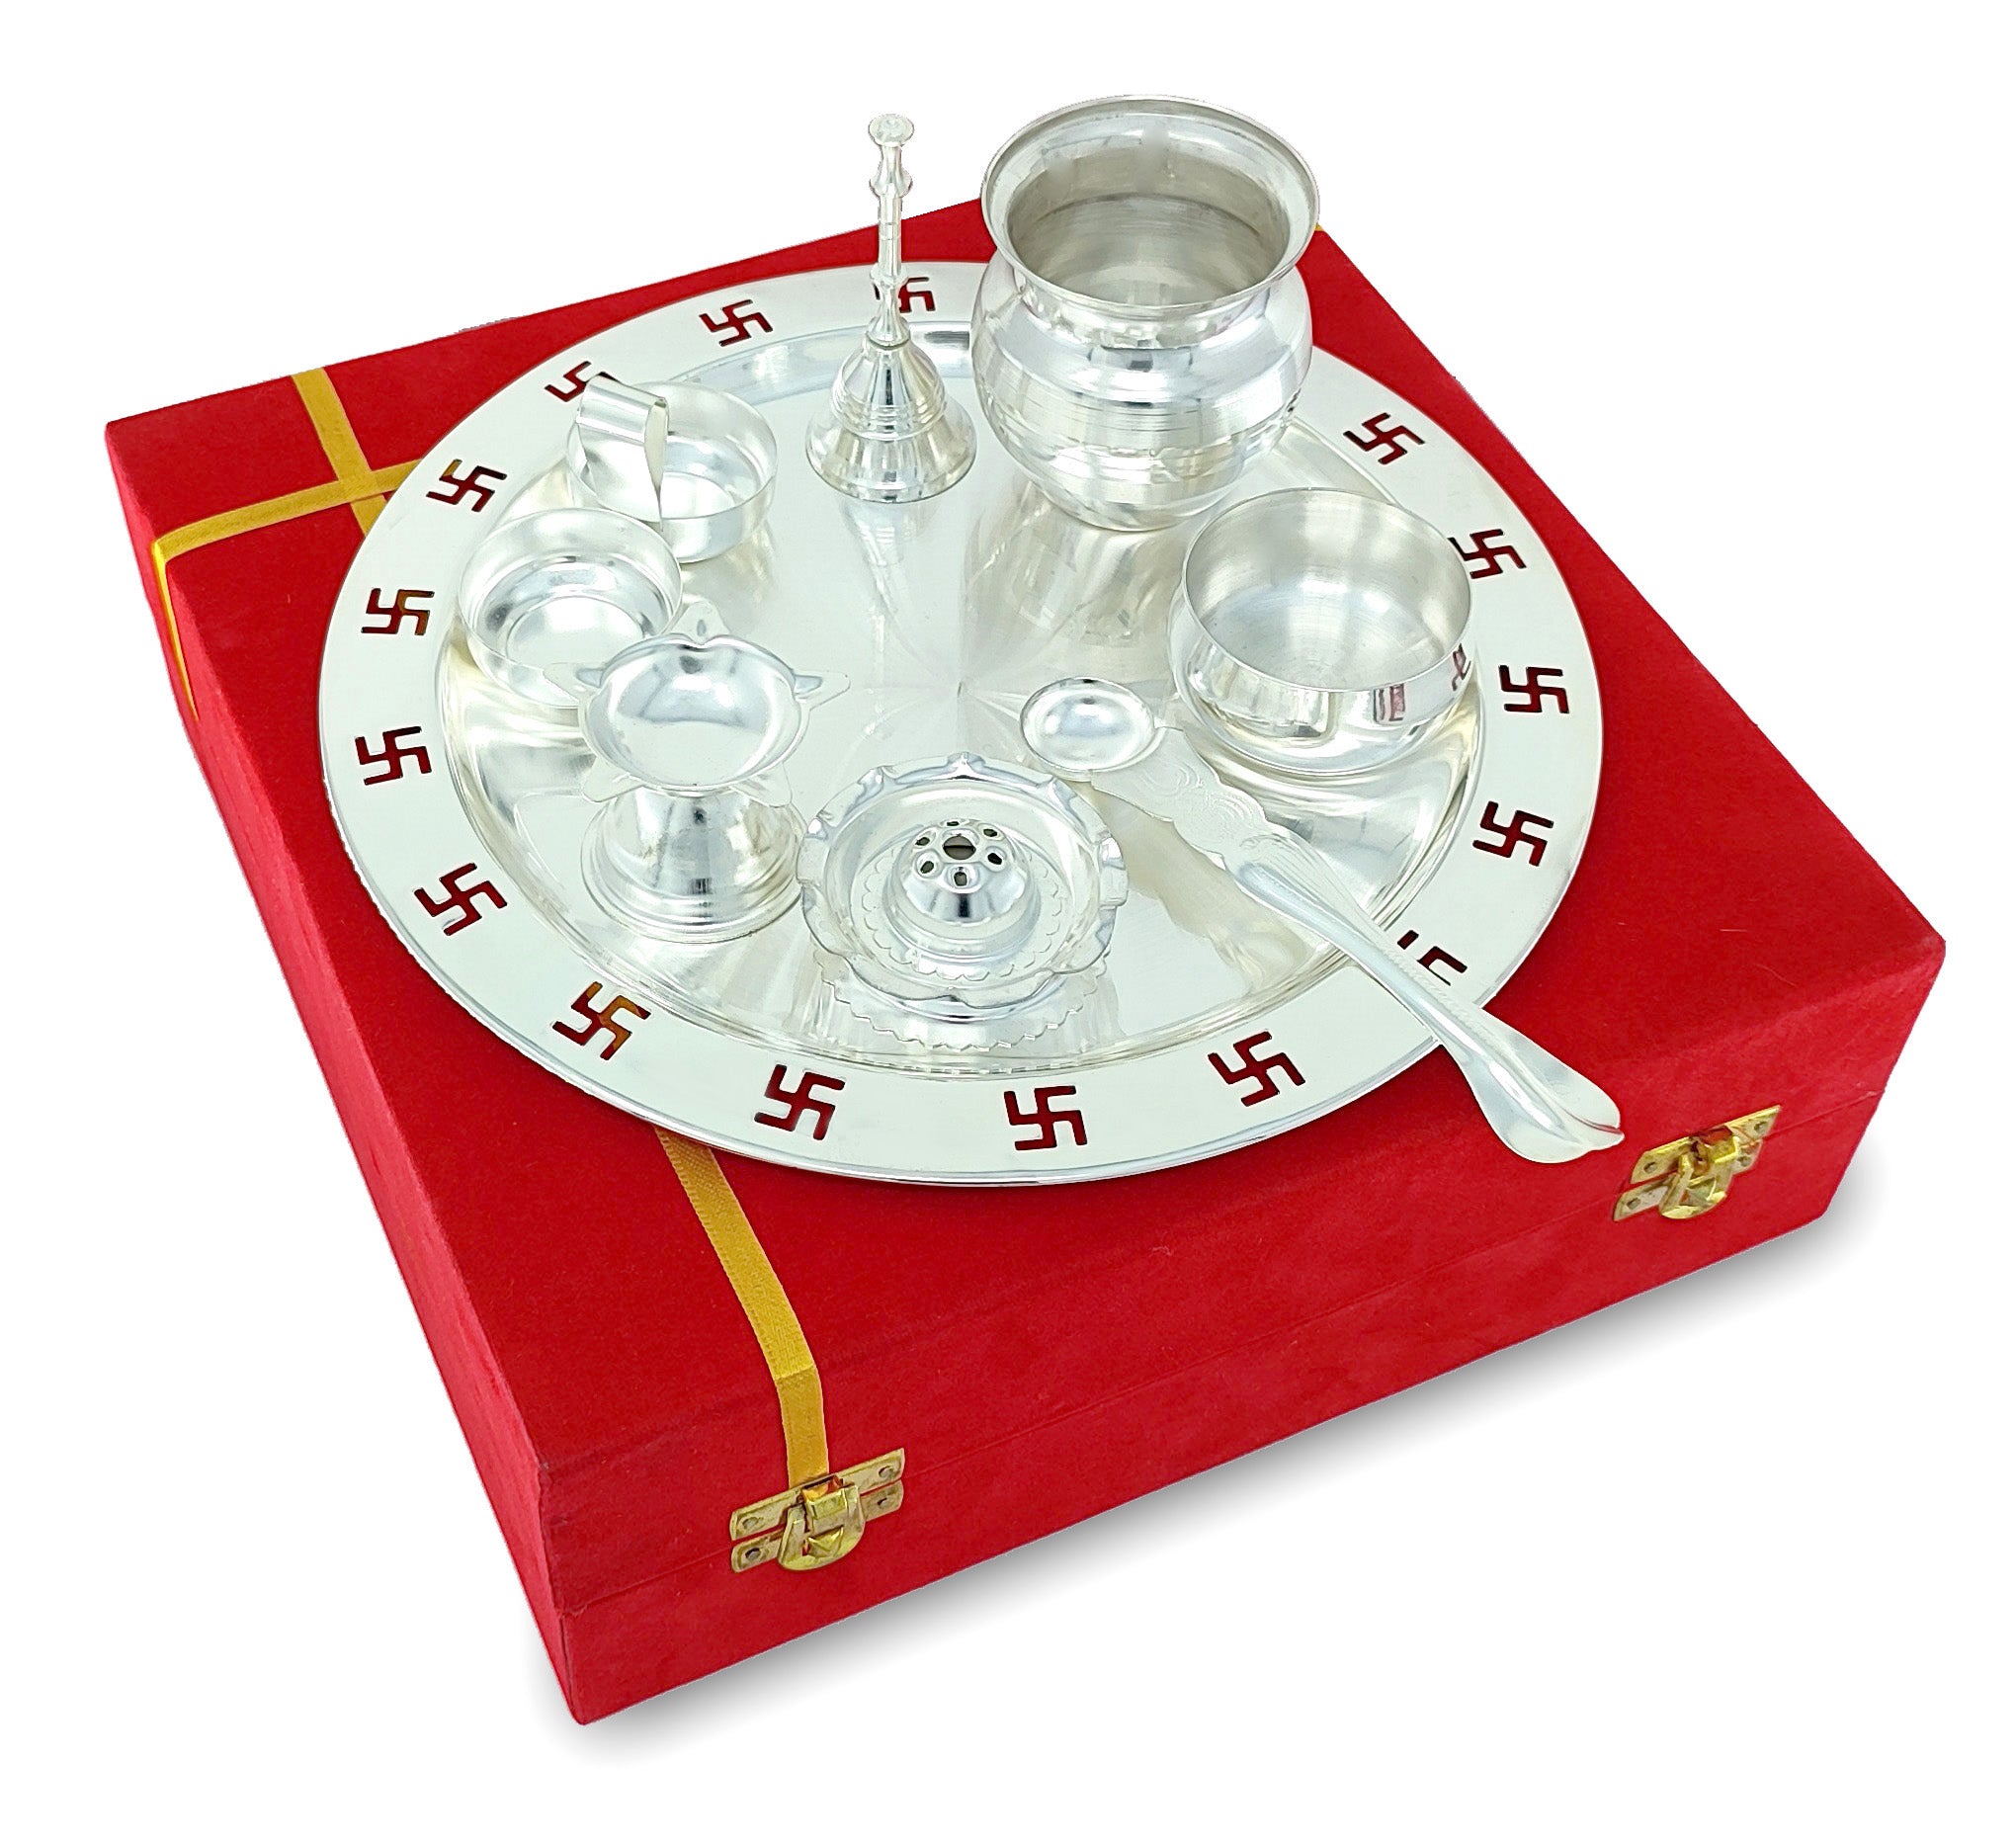 BENGALEN Pooja Thali Set Silver Plated with Red Gift Box